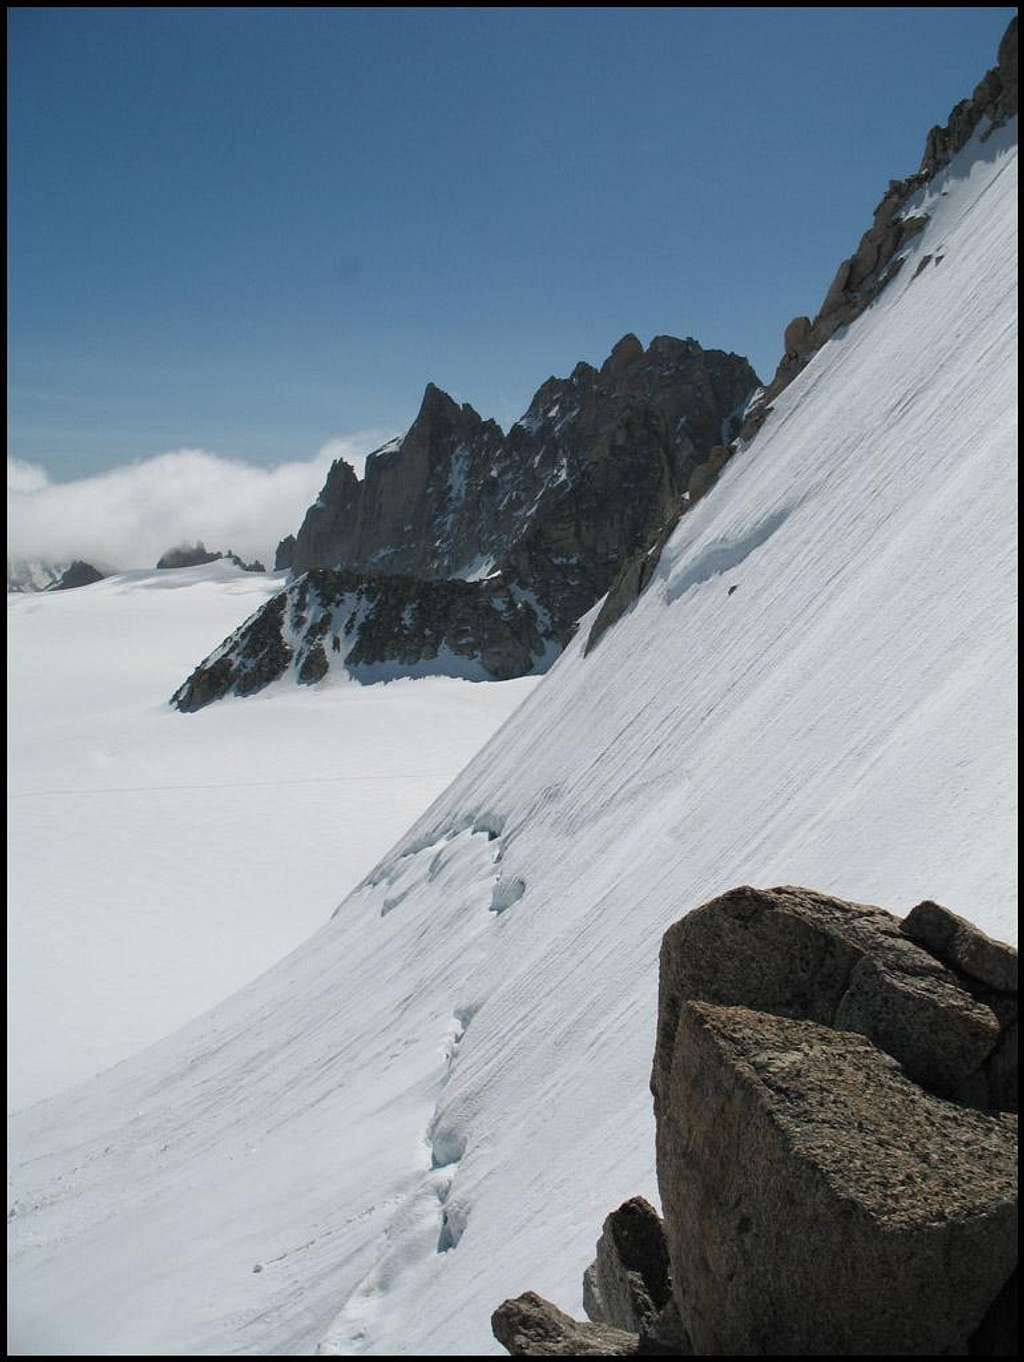 North Face of the Tete Blanche